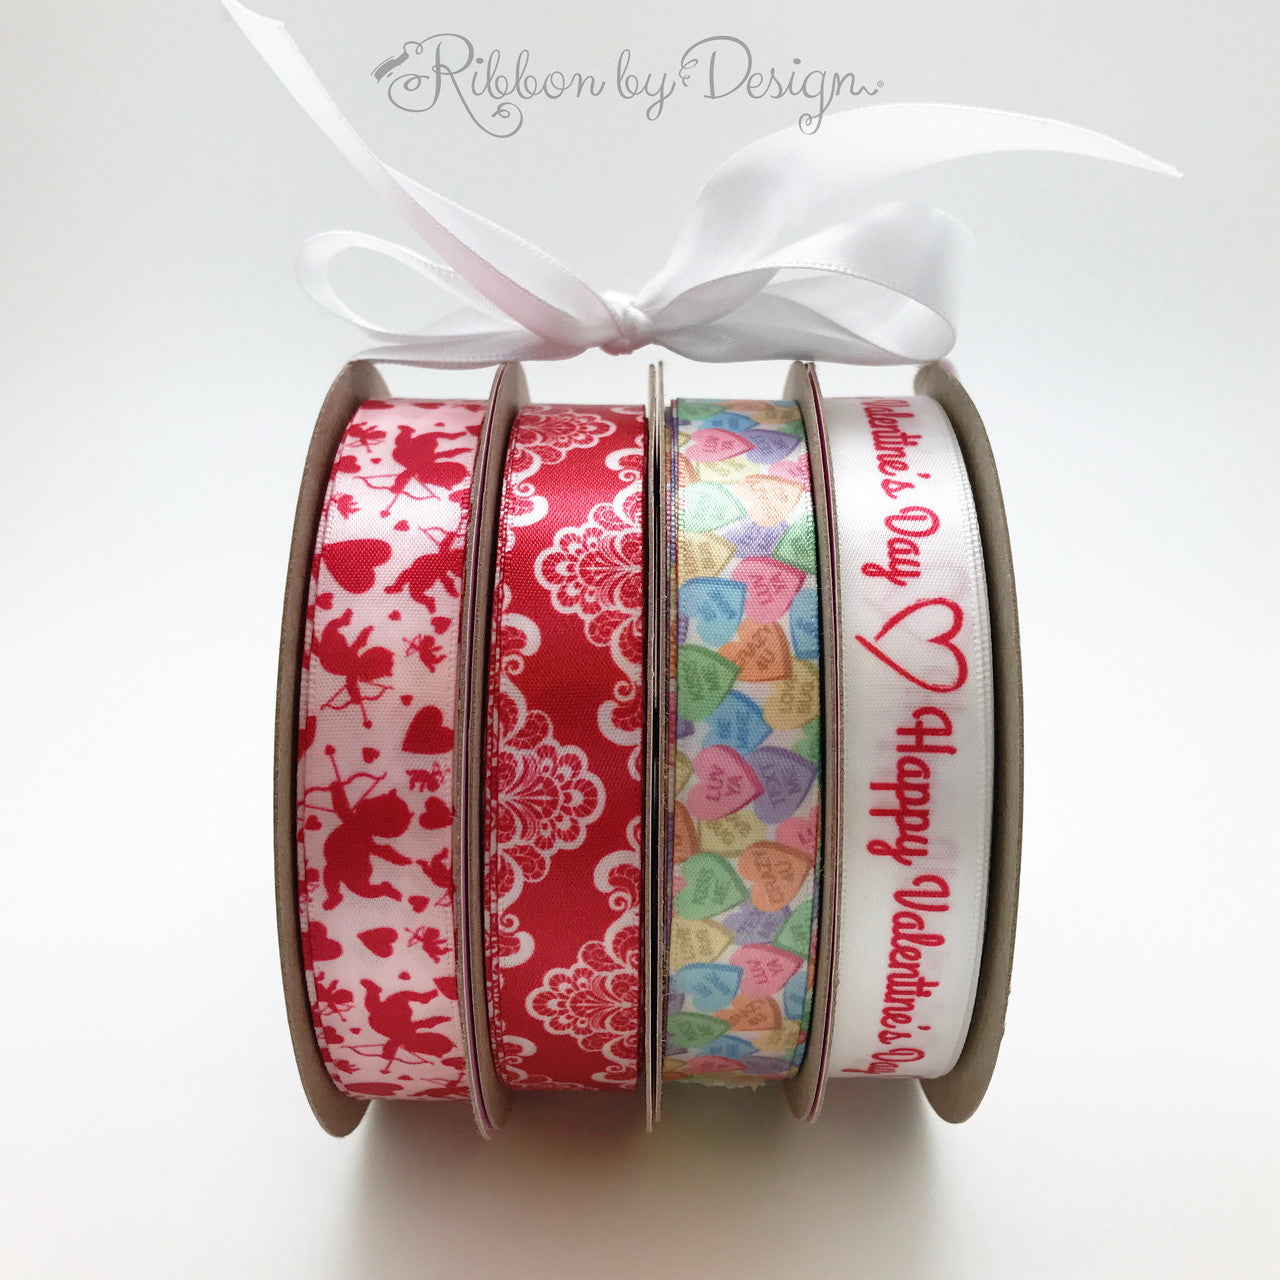 Our white lace on red ribbon can be used in combination with any of our other romantic ribbons! Mix and match for a fun Valentine party look!